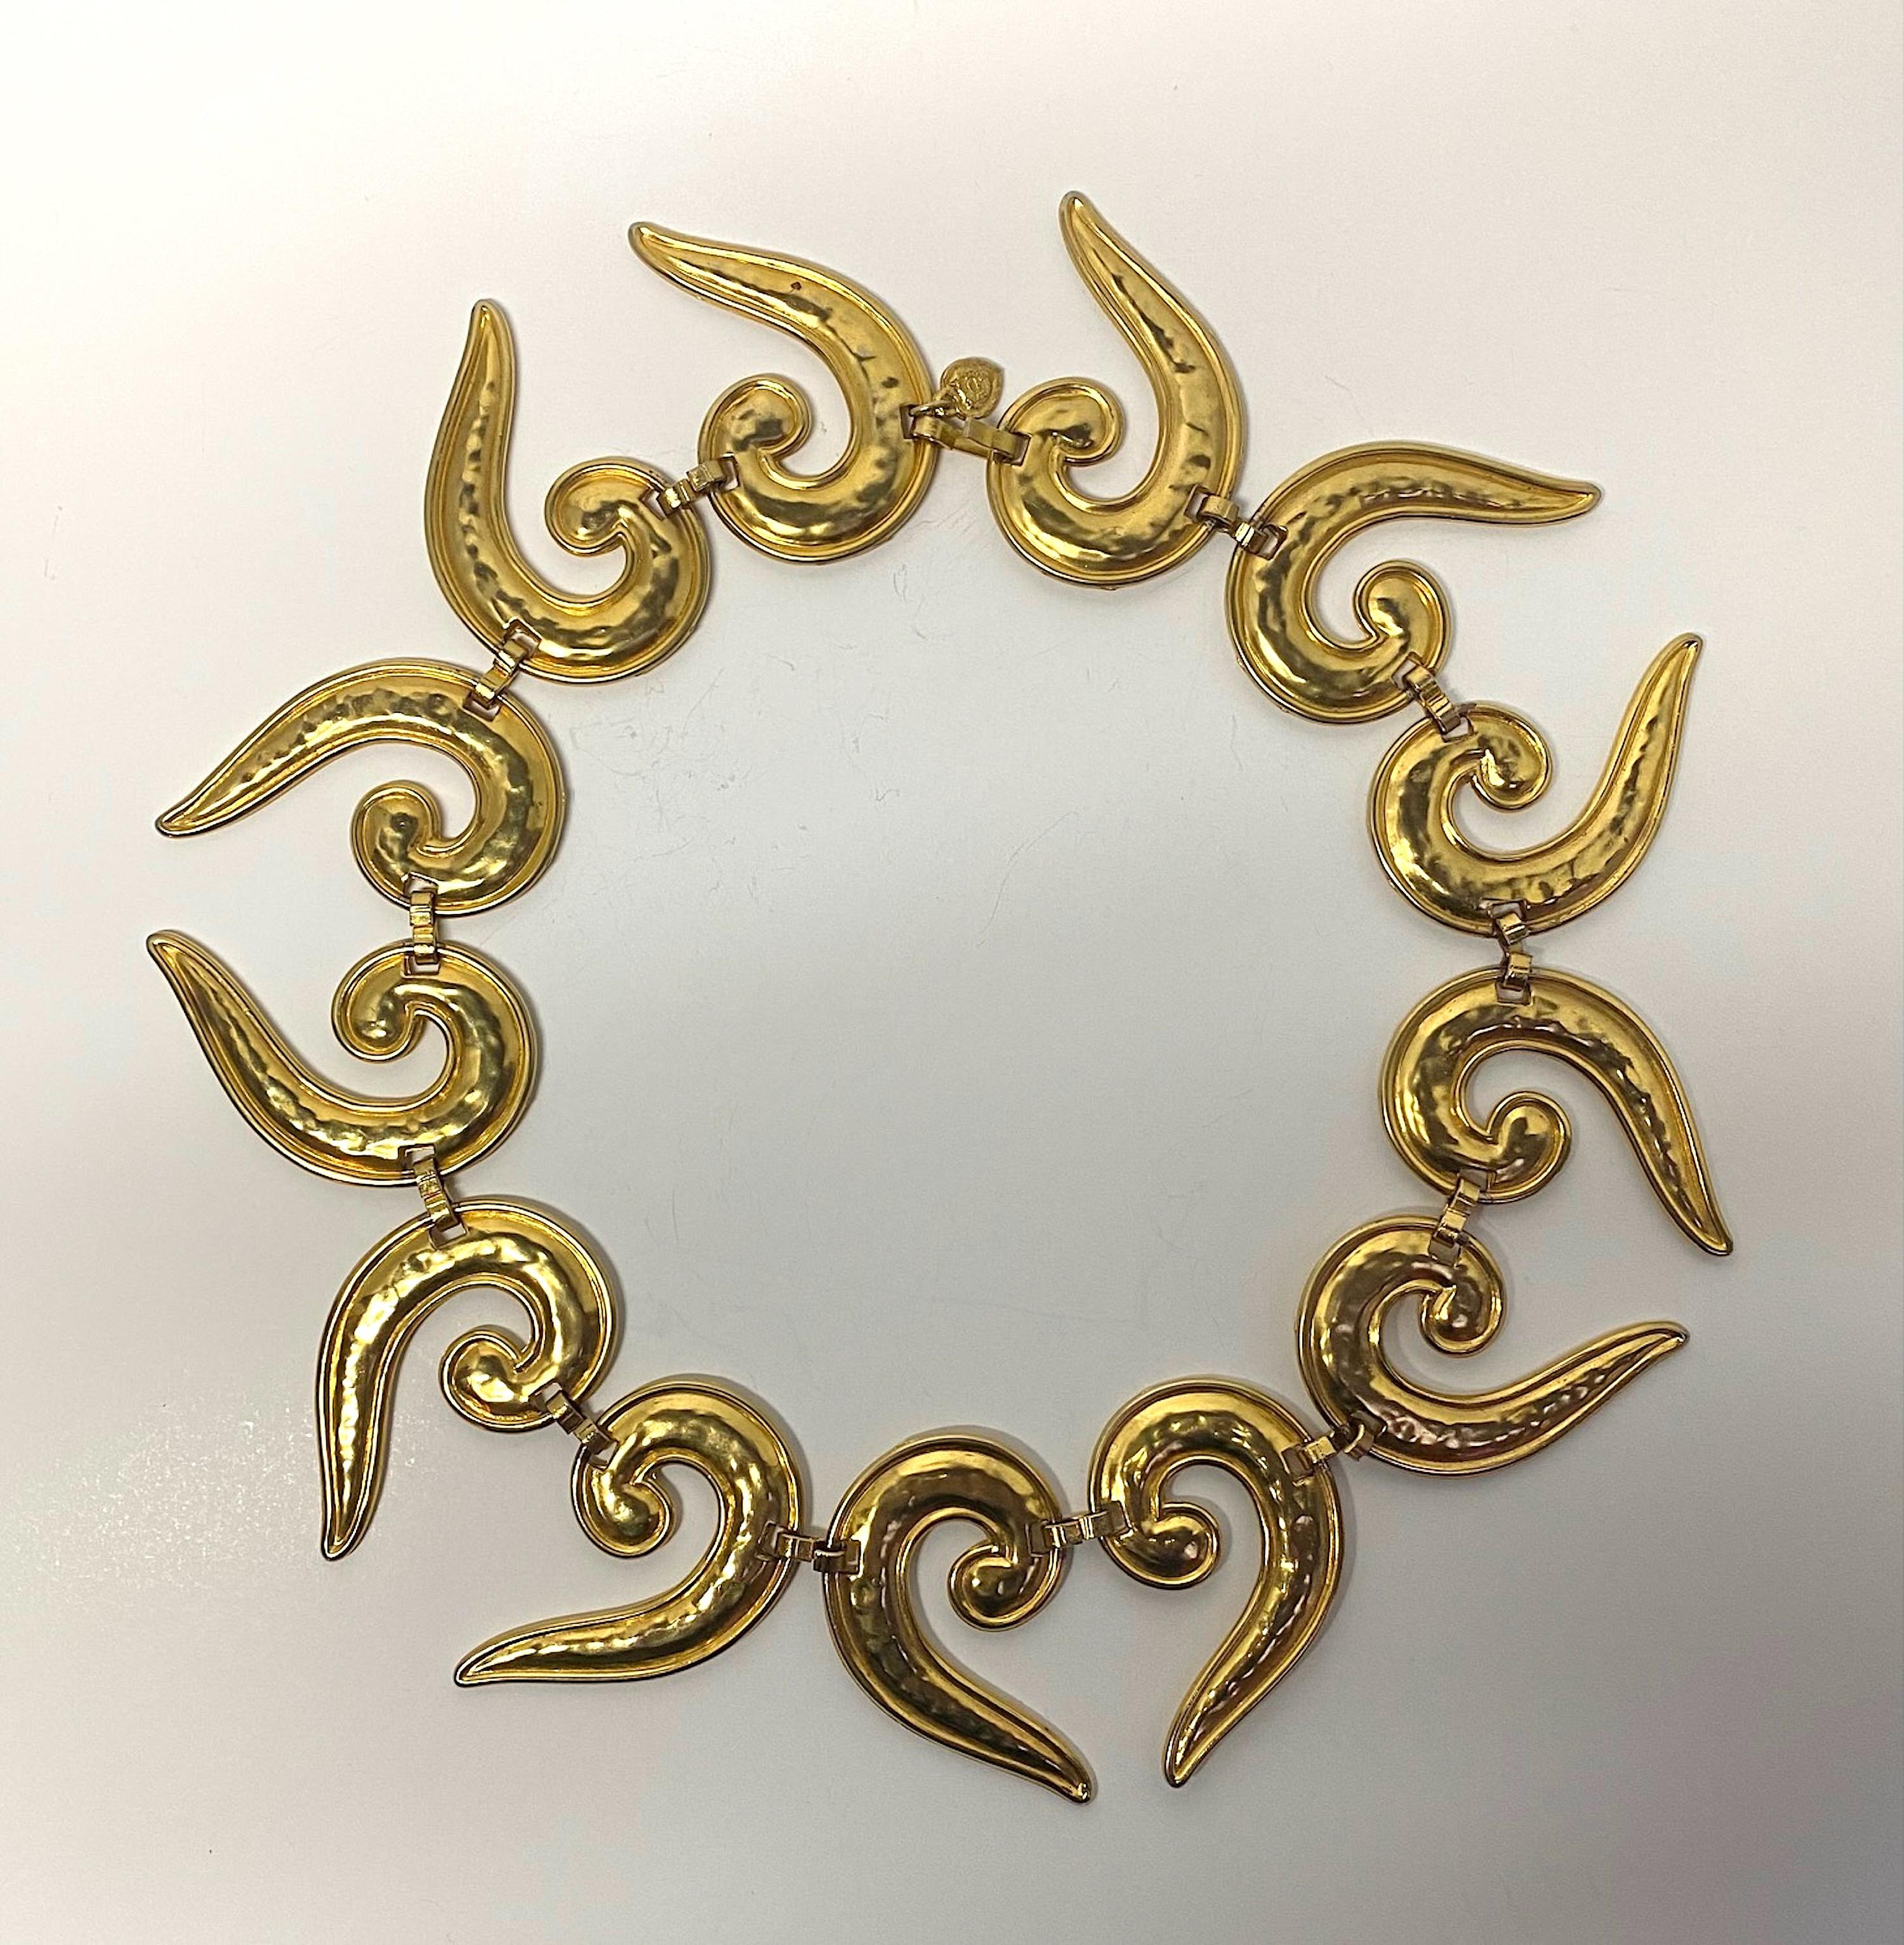 Edouard Rambaud 1980s Gold Etruscan Style Collar Necklace For Sale 9